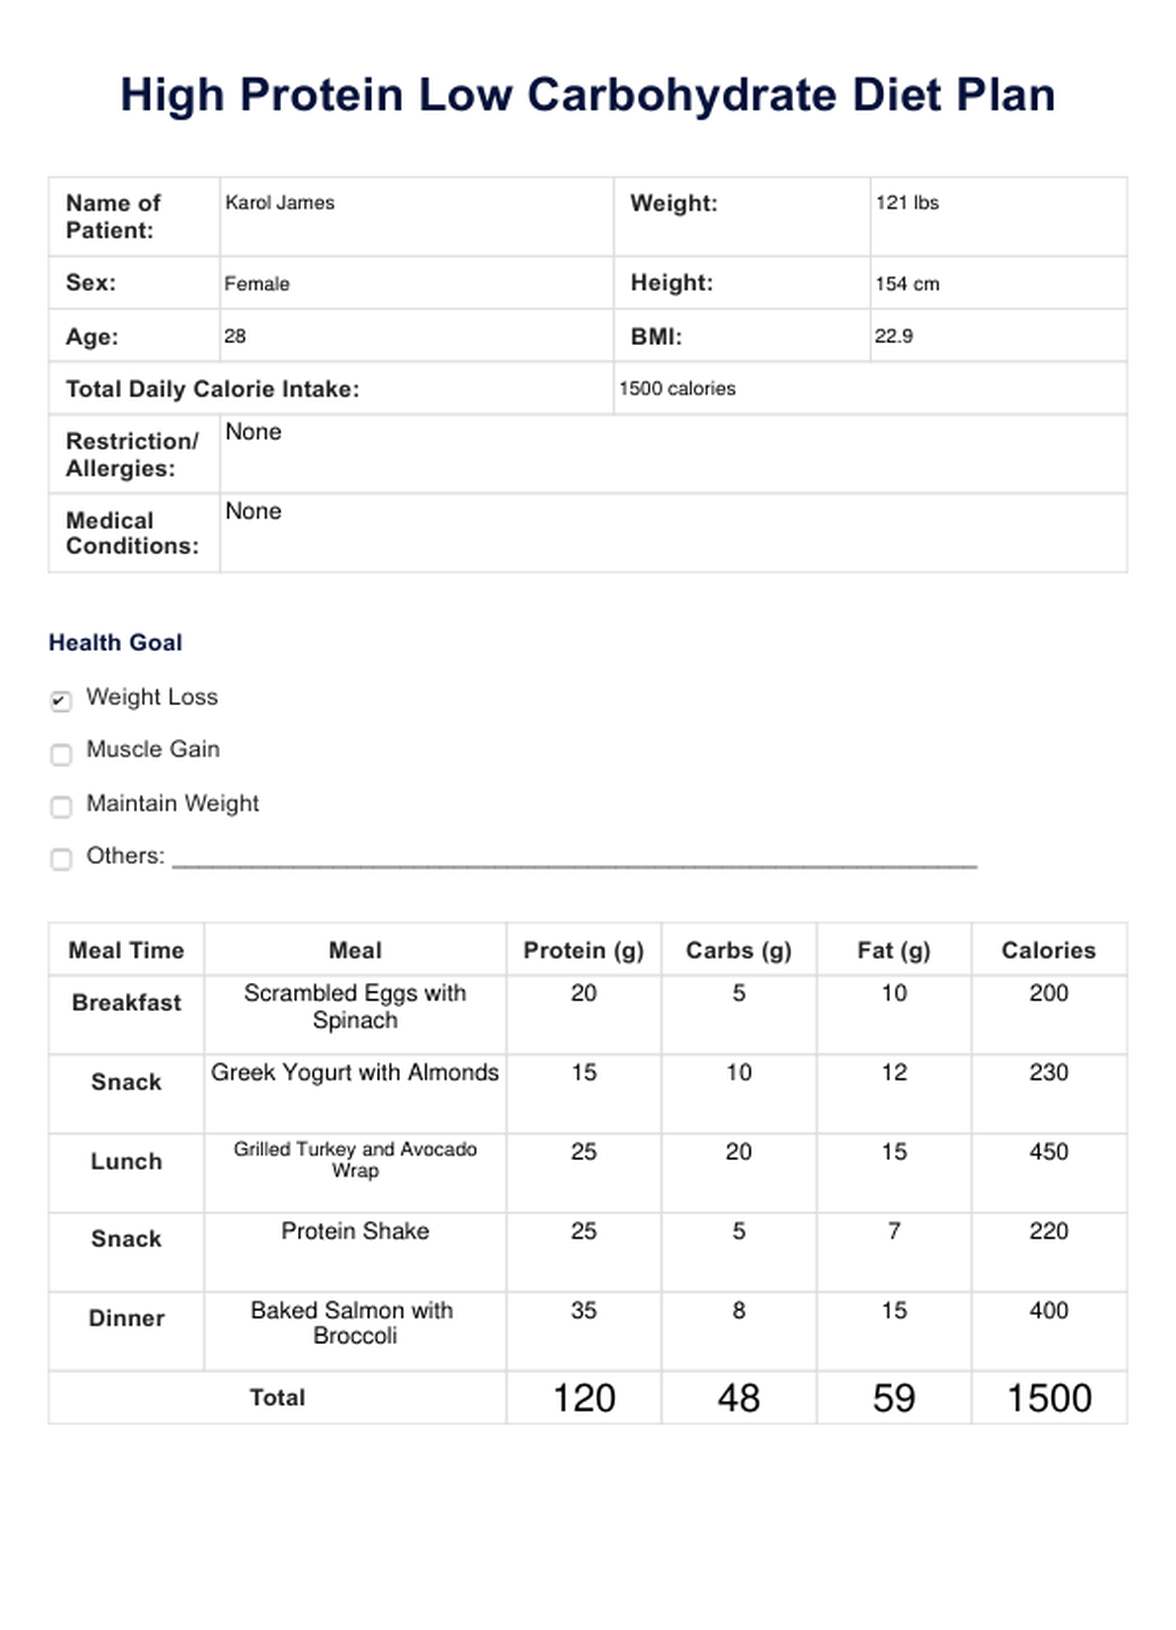 High Protein Low Carb Diet Plan PDF Example